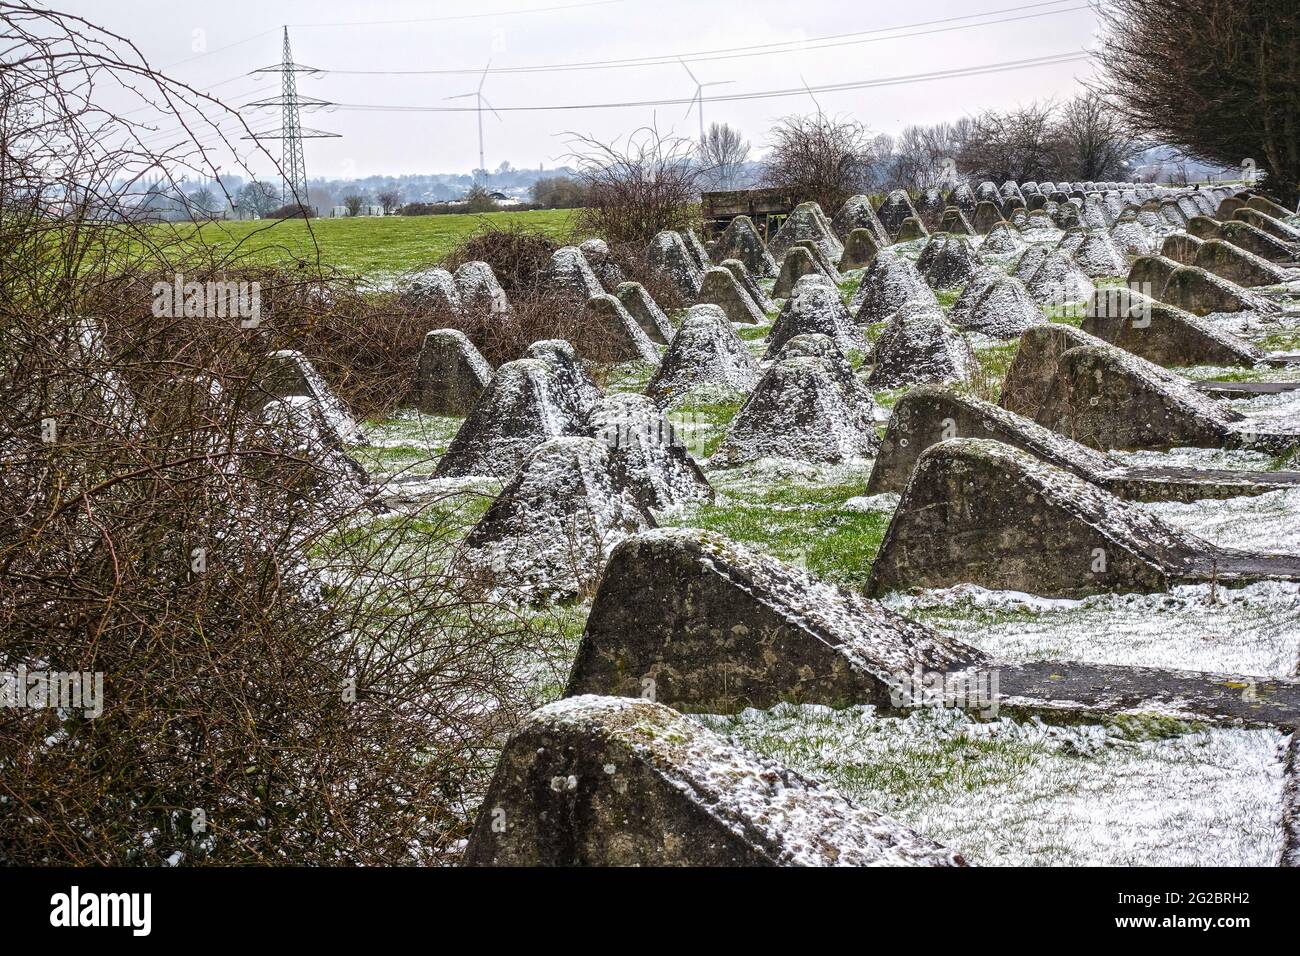 Pyramid-shaped concrete blocks, also called dragon's teeth, as part of the historic Westwall (Siegfried Line), built during World War II. by Germans t Stock Photo